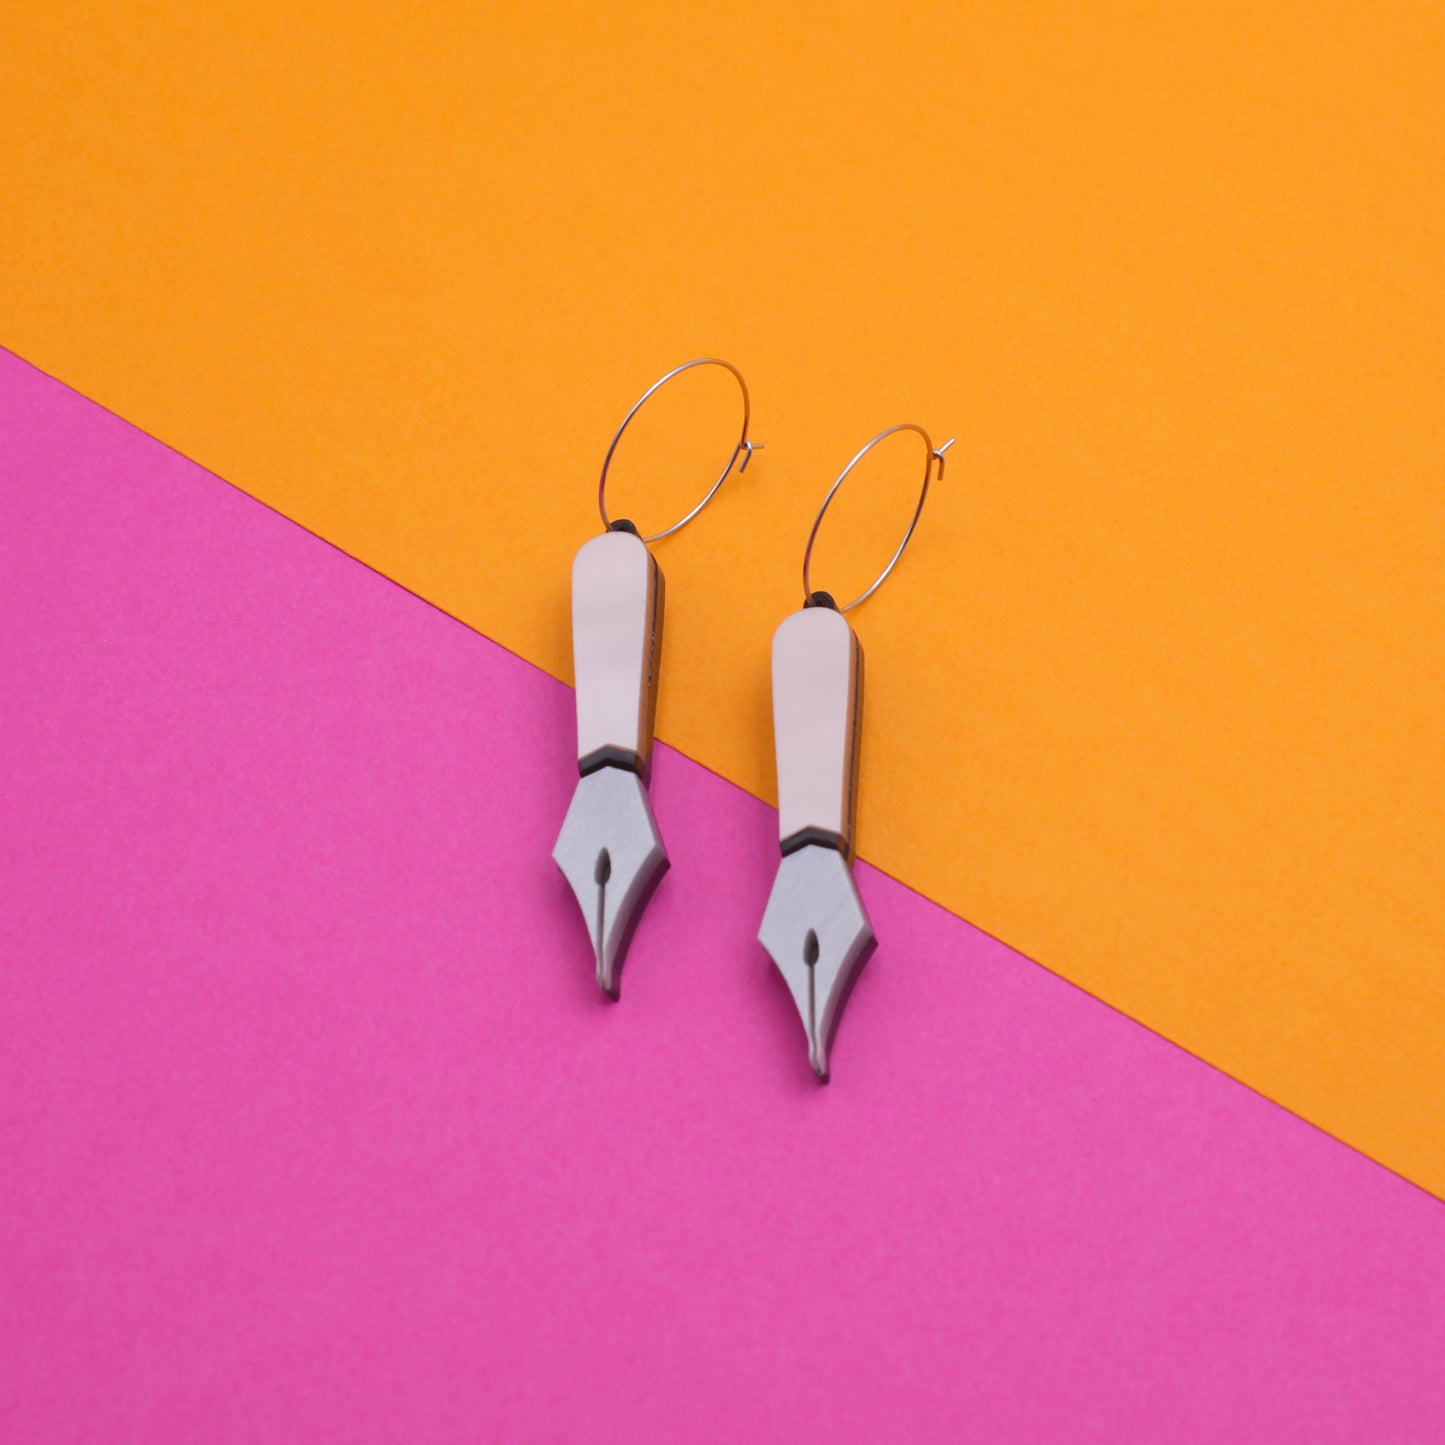 A pair of laser-cut black and pink pearly acrylic pen nib hoops earrings on a pink and orange background. 